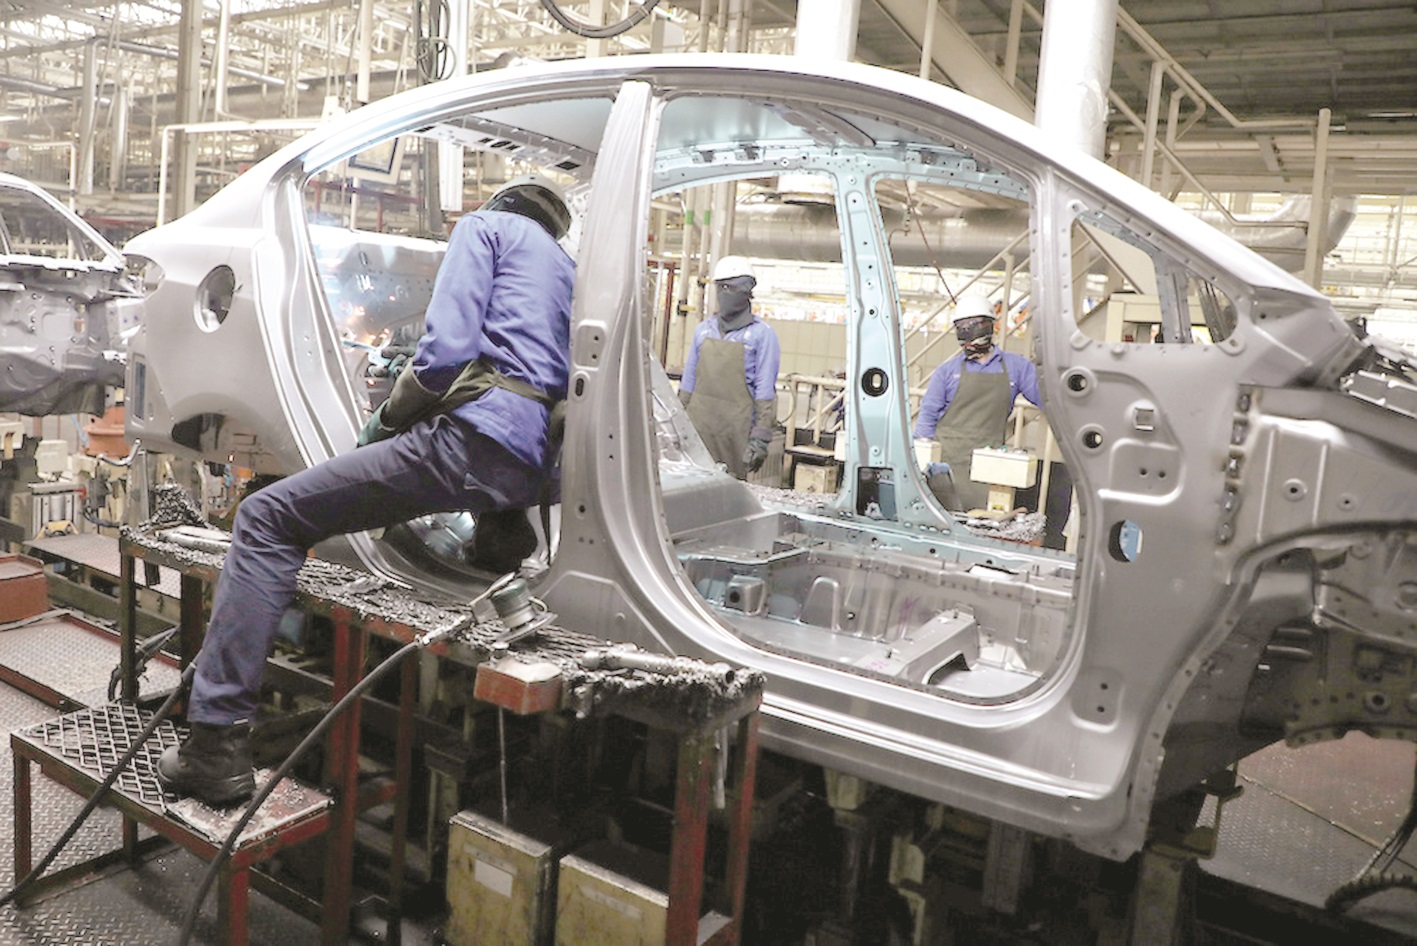  Automotive sector to strengthen in near-term: Research firms